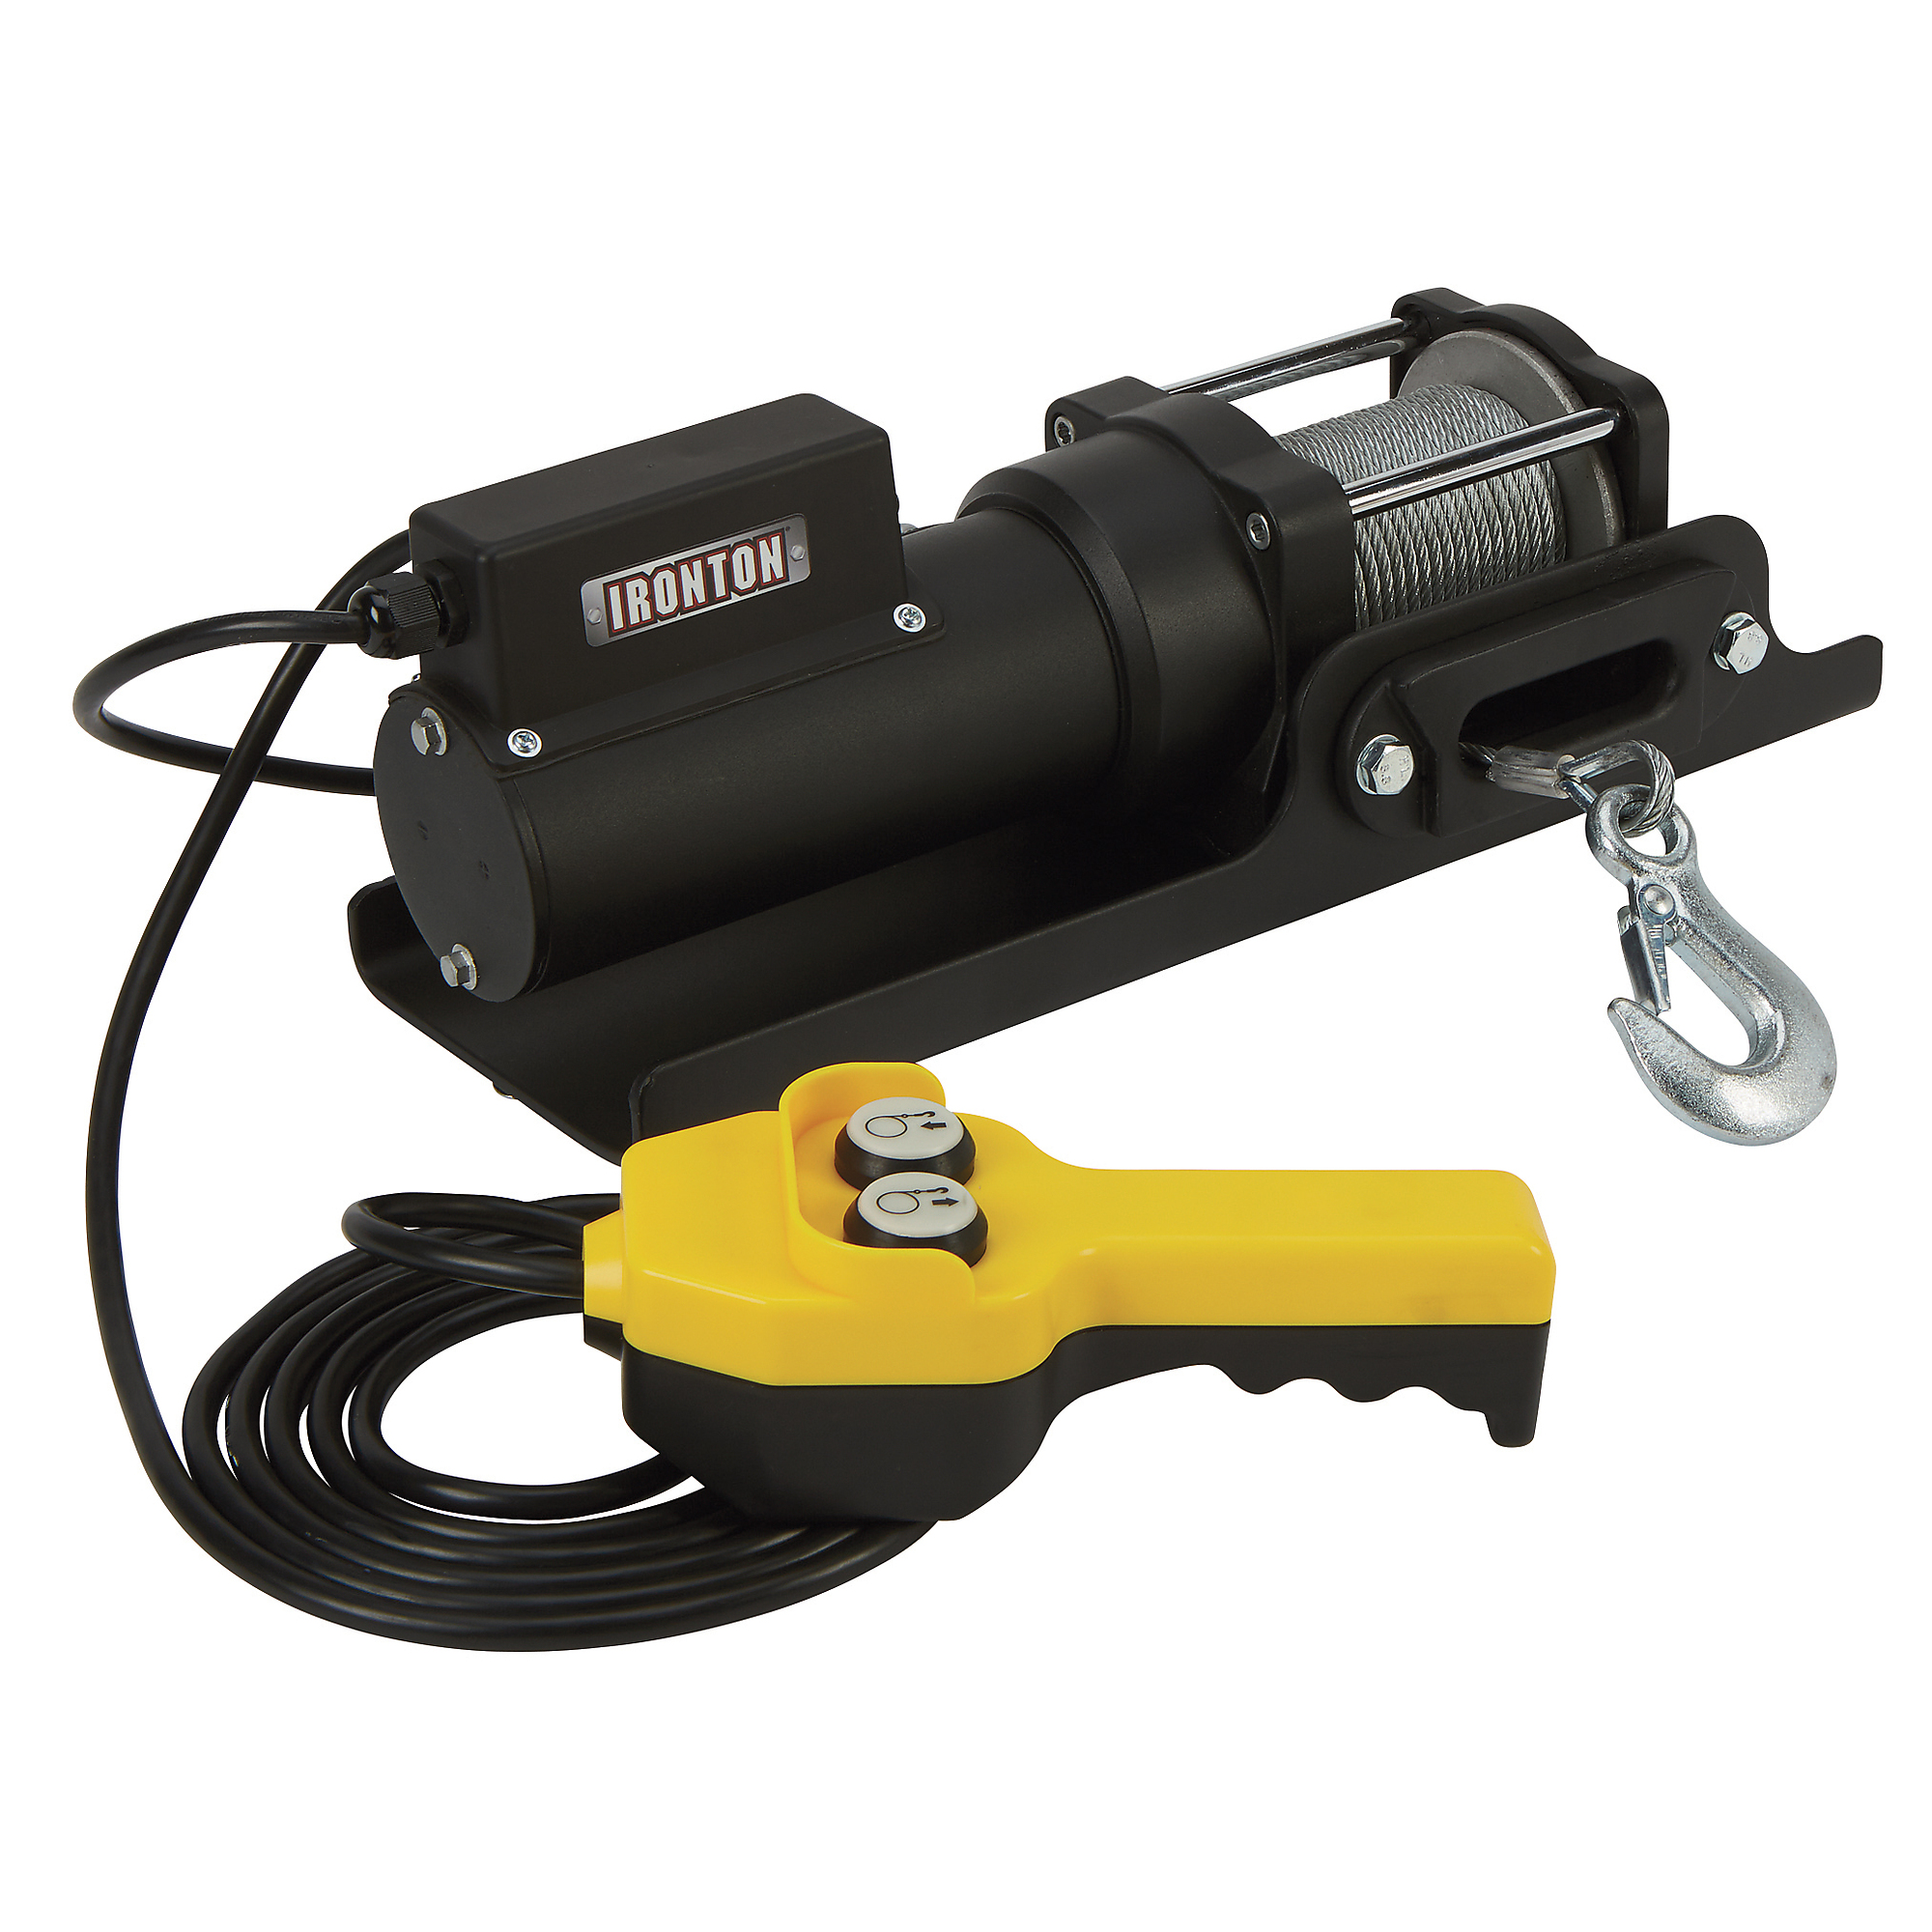 Ironton AC-Powered Electric Winch, 1500-Lb. Capacity, Steel Wire Rope, Model AC1500